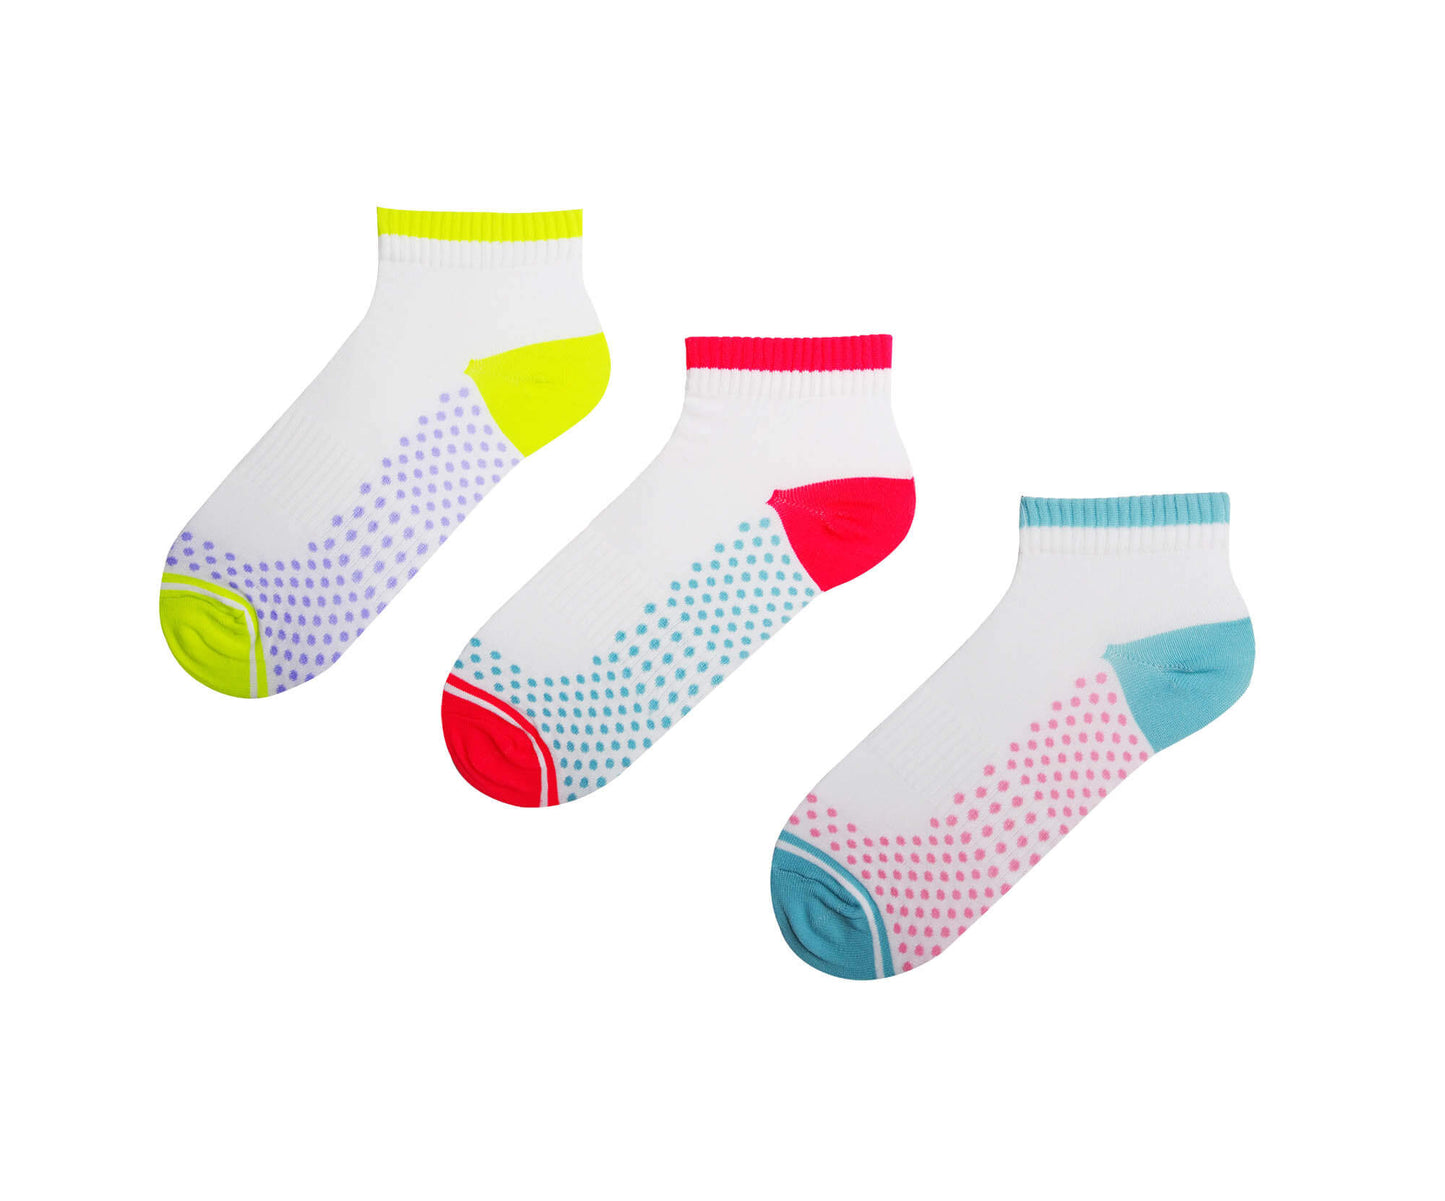 highlighting women's grip performance socks in a low cut design, providing reliable grip and comfort during active pursuits.